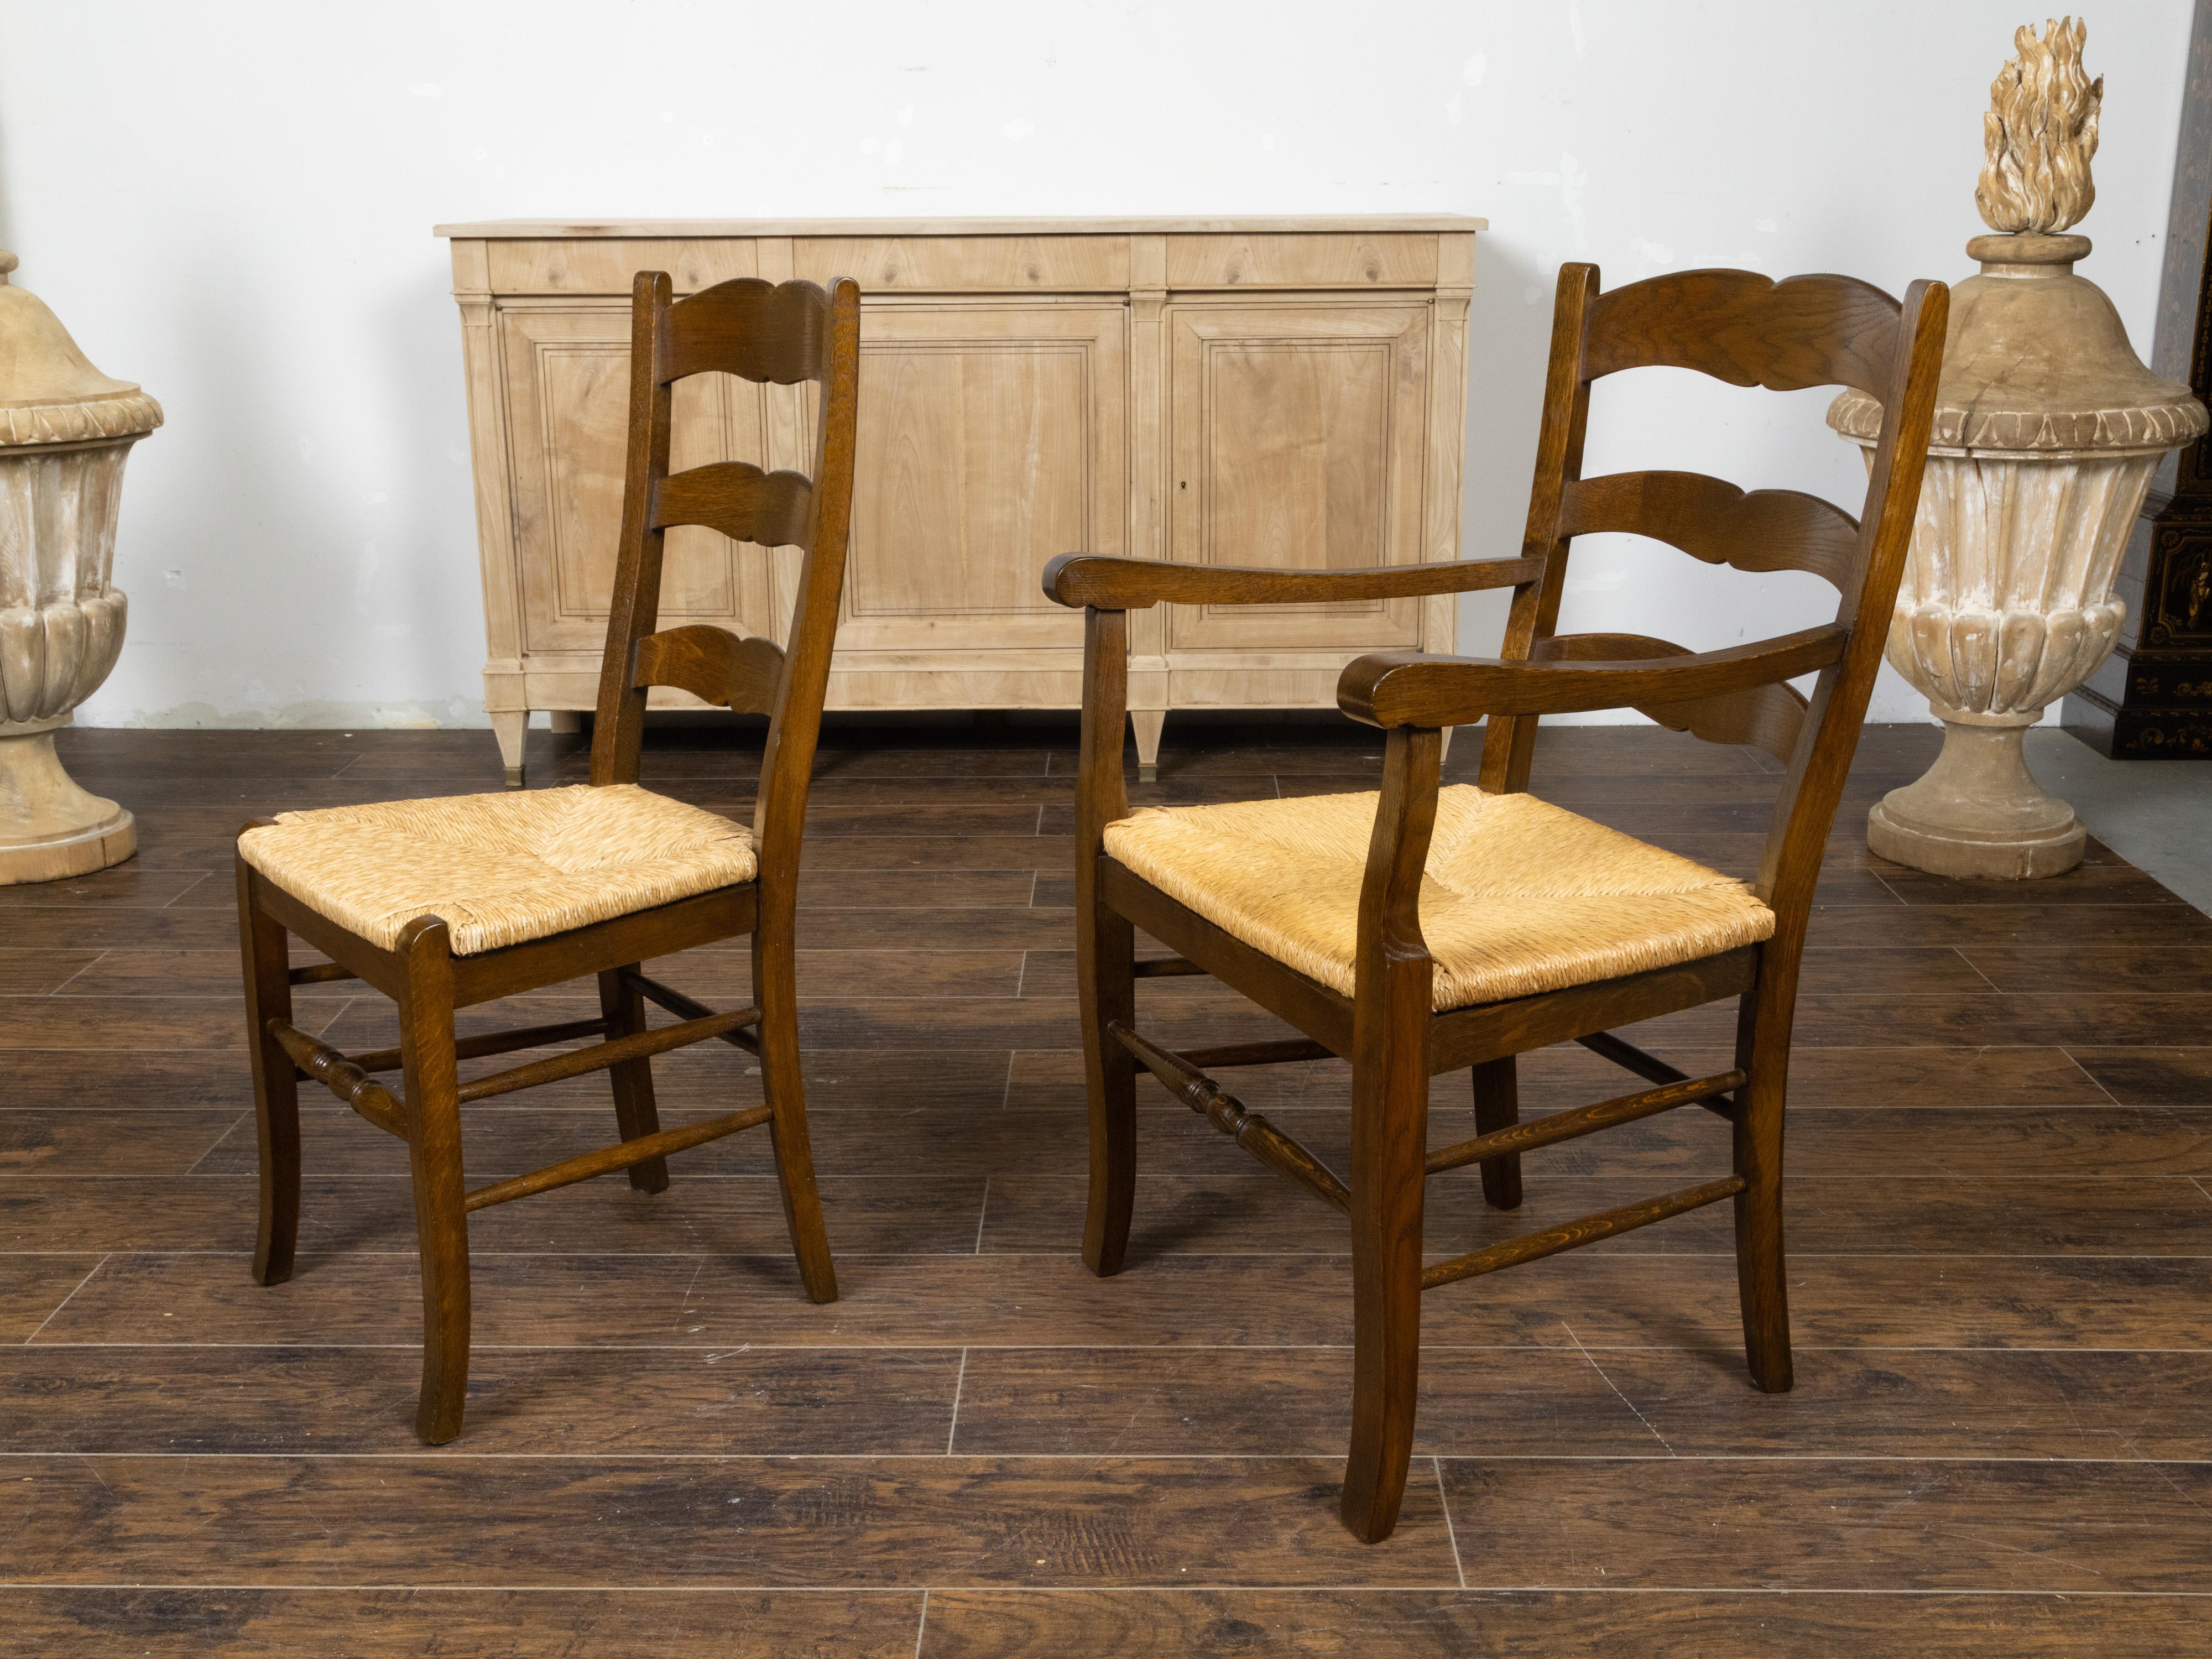 A set of eight English oak ladder back dining room chairs from the early 20th century, with rush seats and comprising of two armchairs and six sides. Created in England during the Turn of the Century which saw the transition between the 19th to the